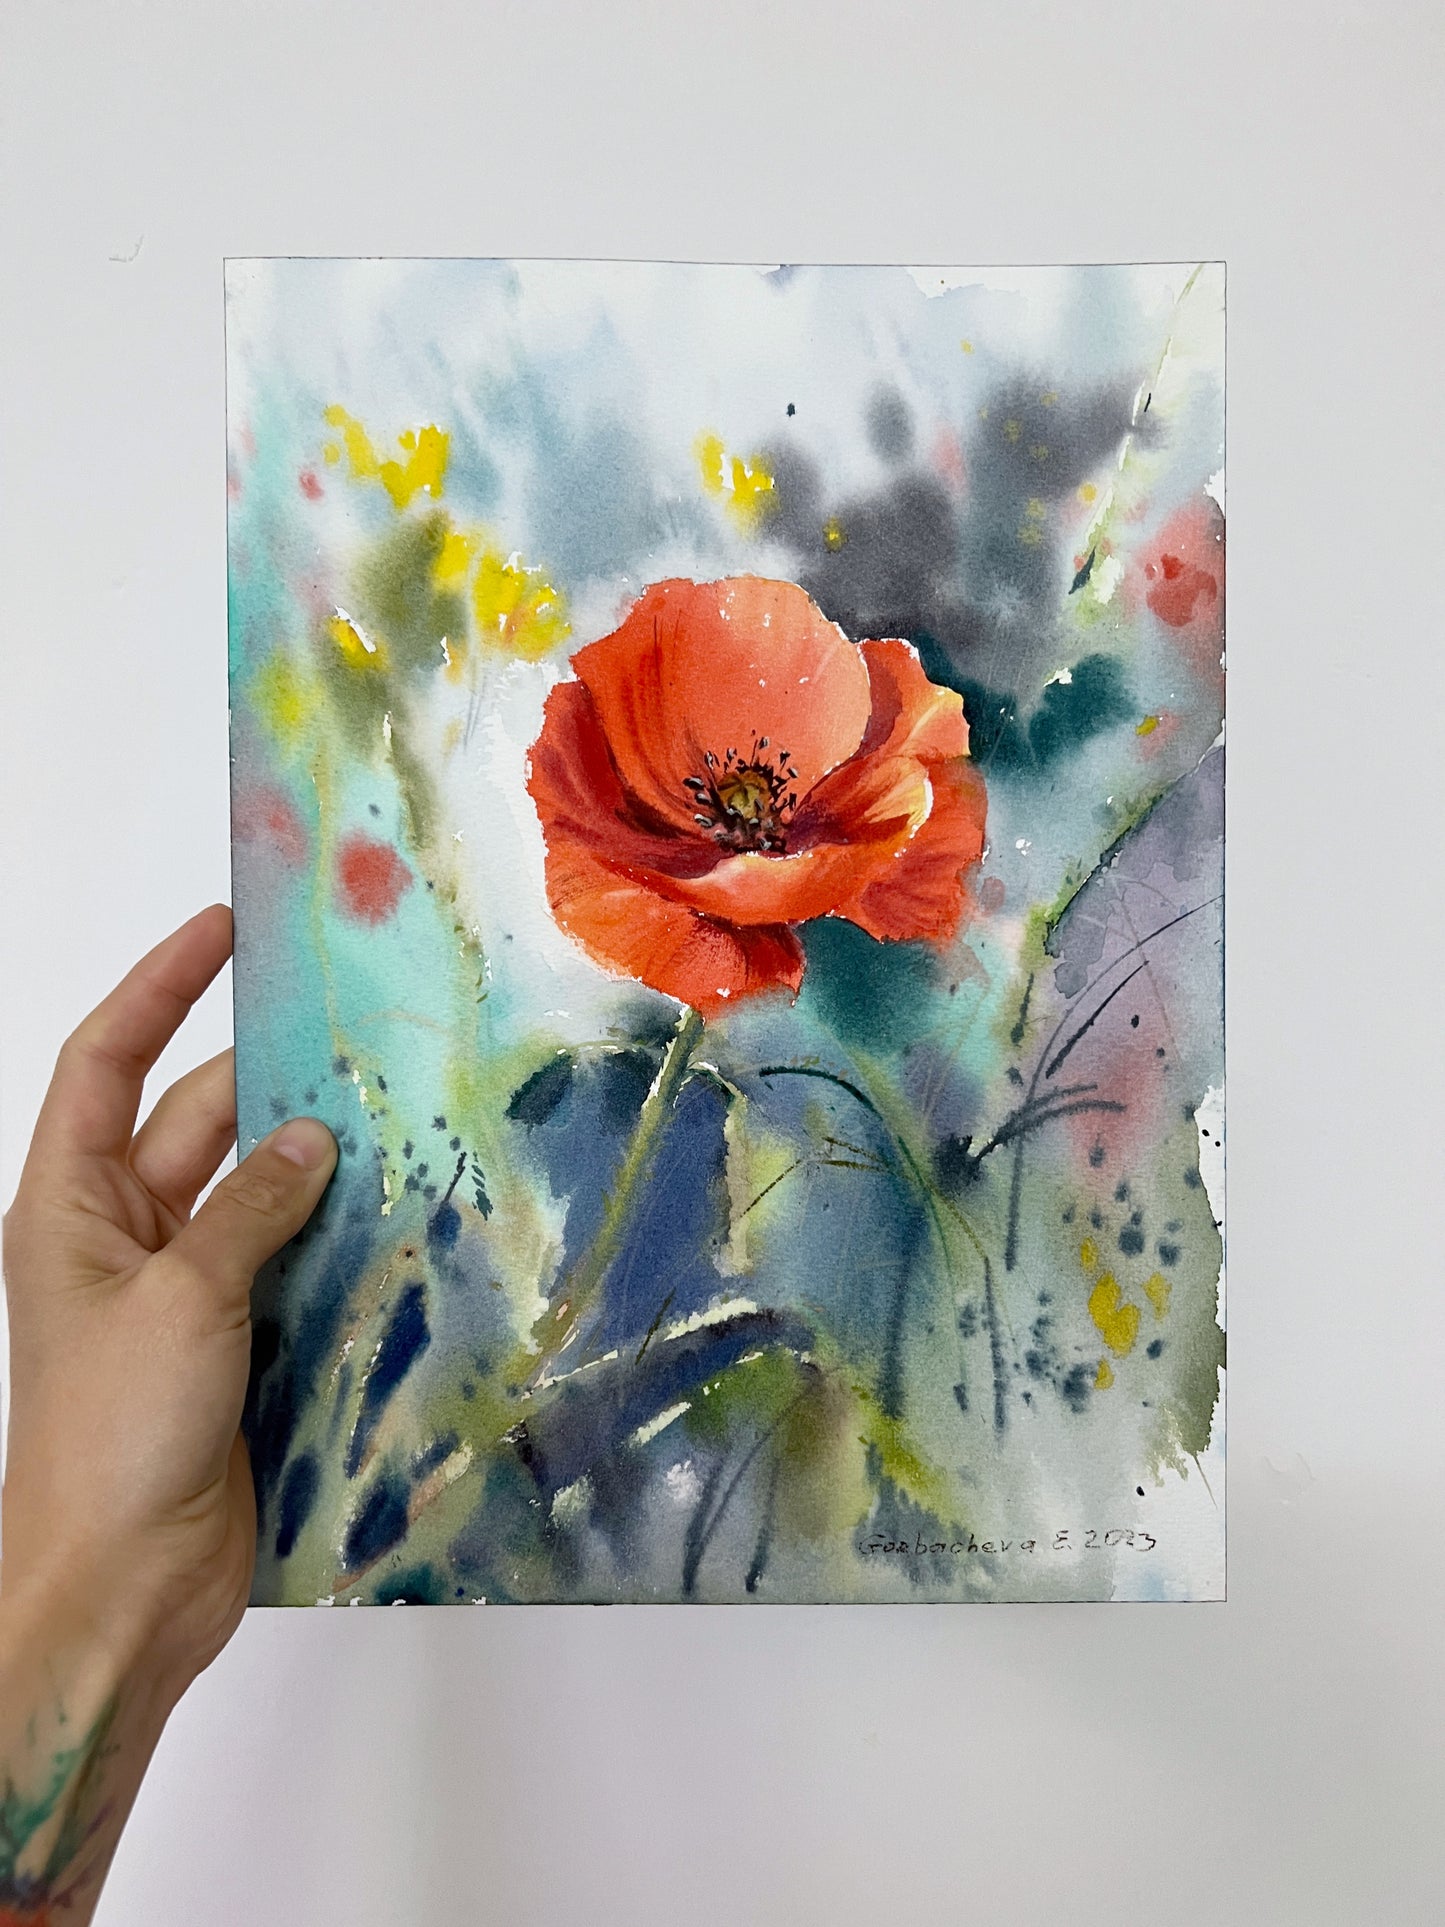 Red Poppy Flower Watercolor Painting, Original Artwork, Botanical Floral Abstract, Gift, 12x9"